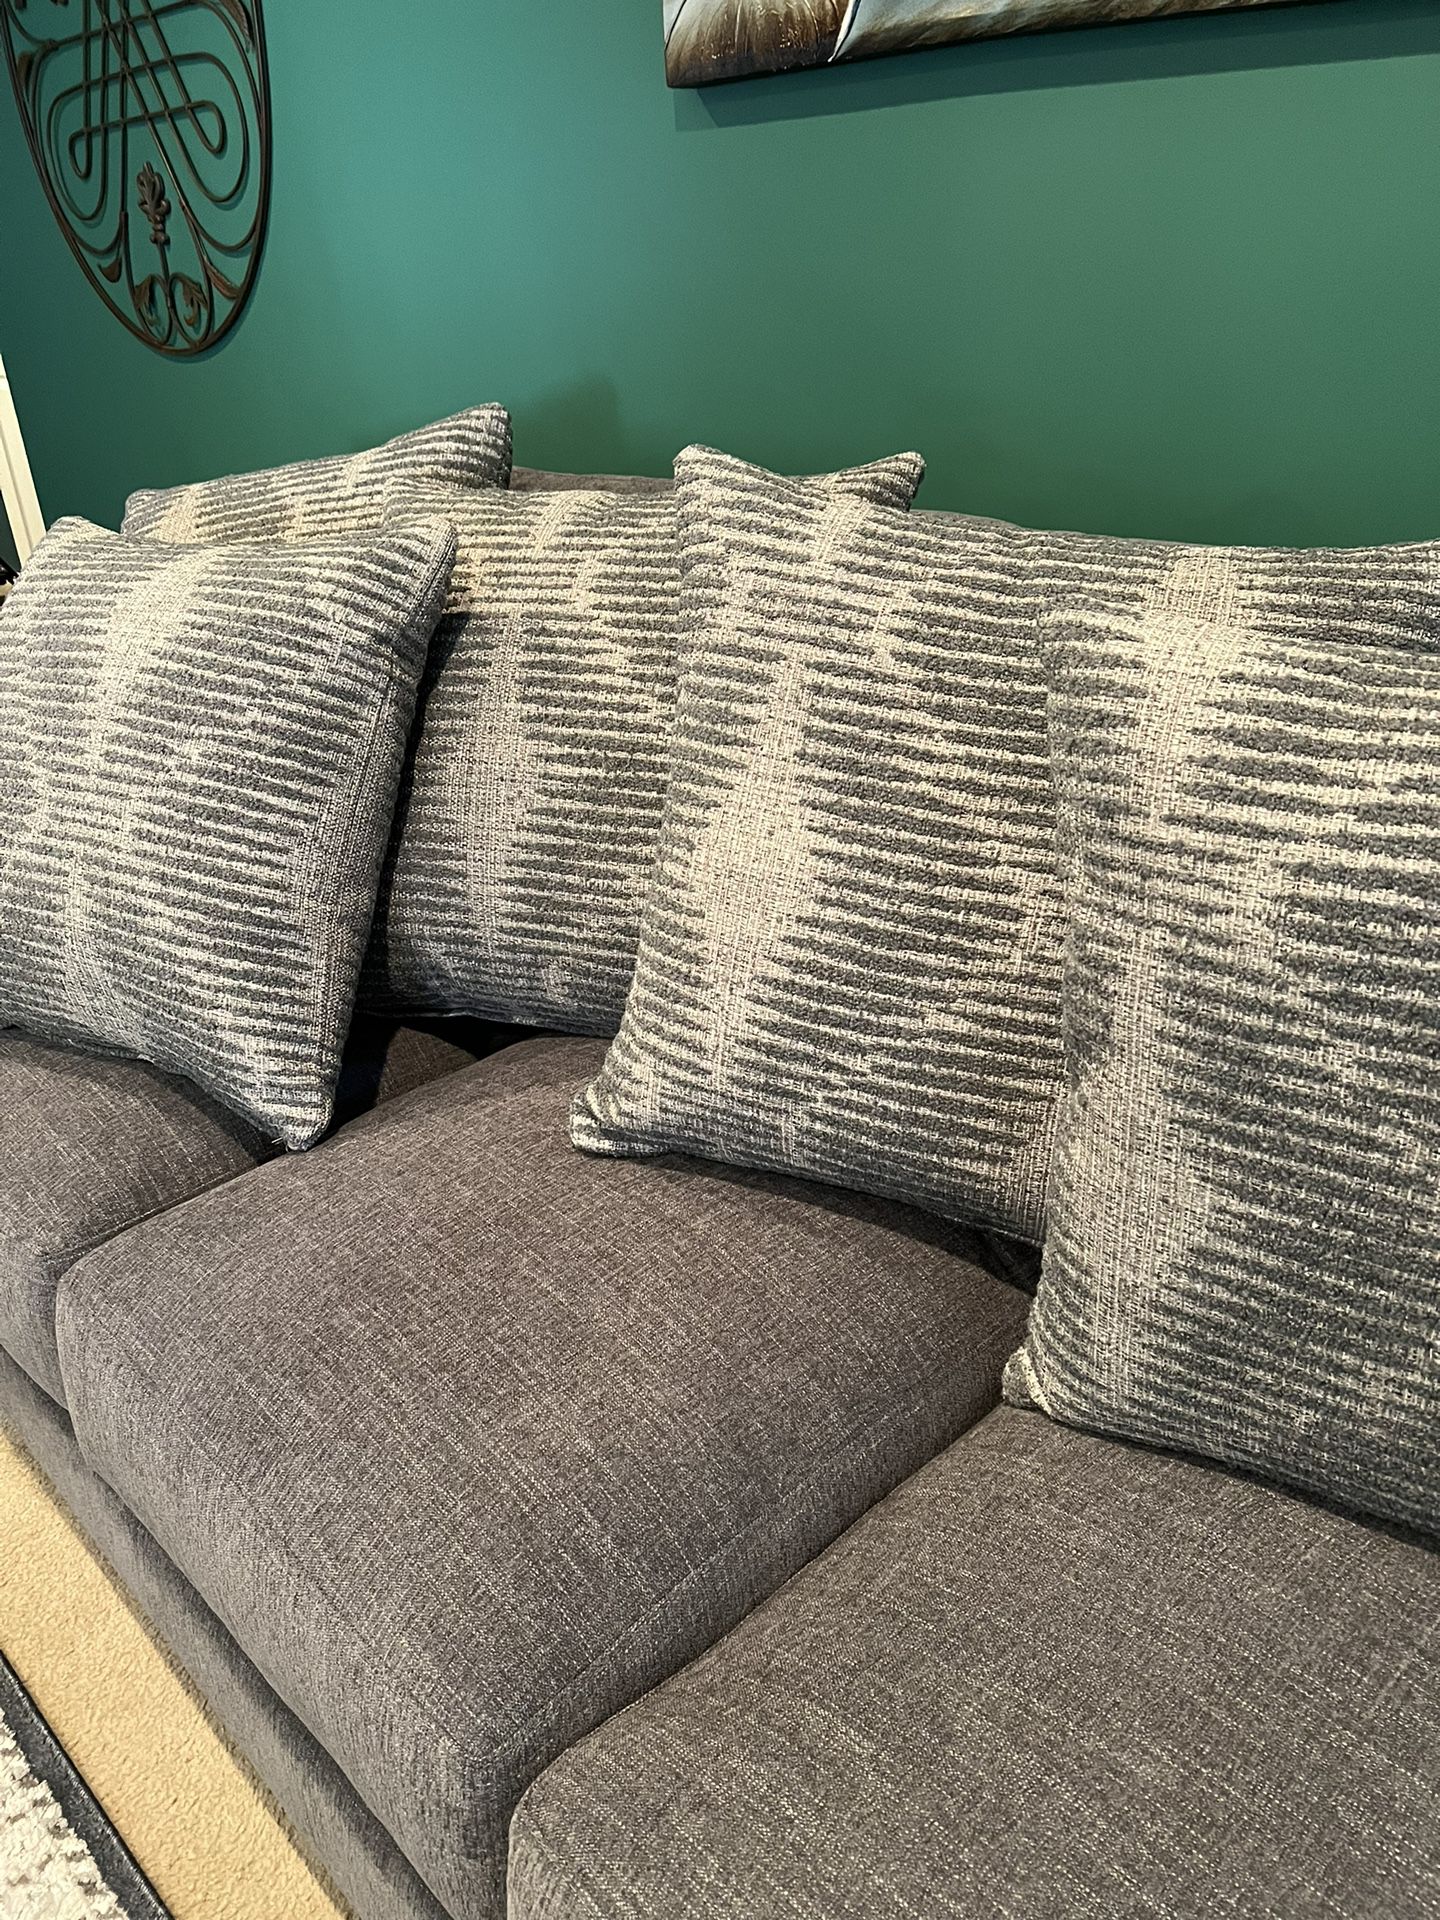 20x20 BRAND NEW Gray Couch Pillows / All 5 For $60